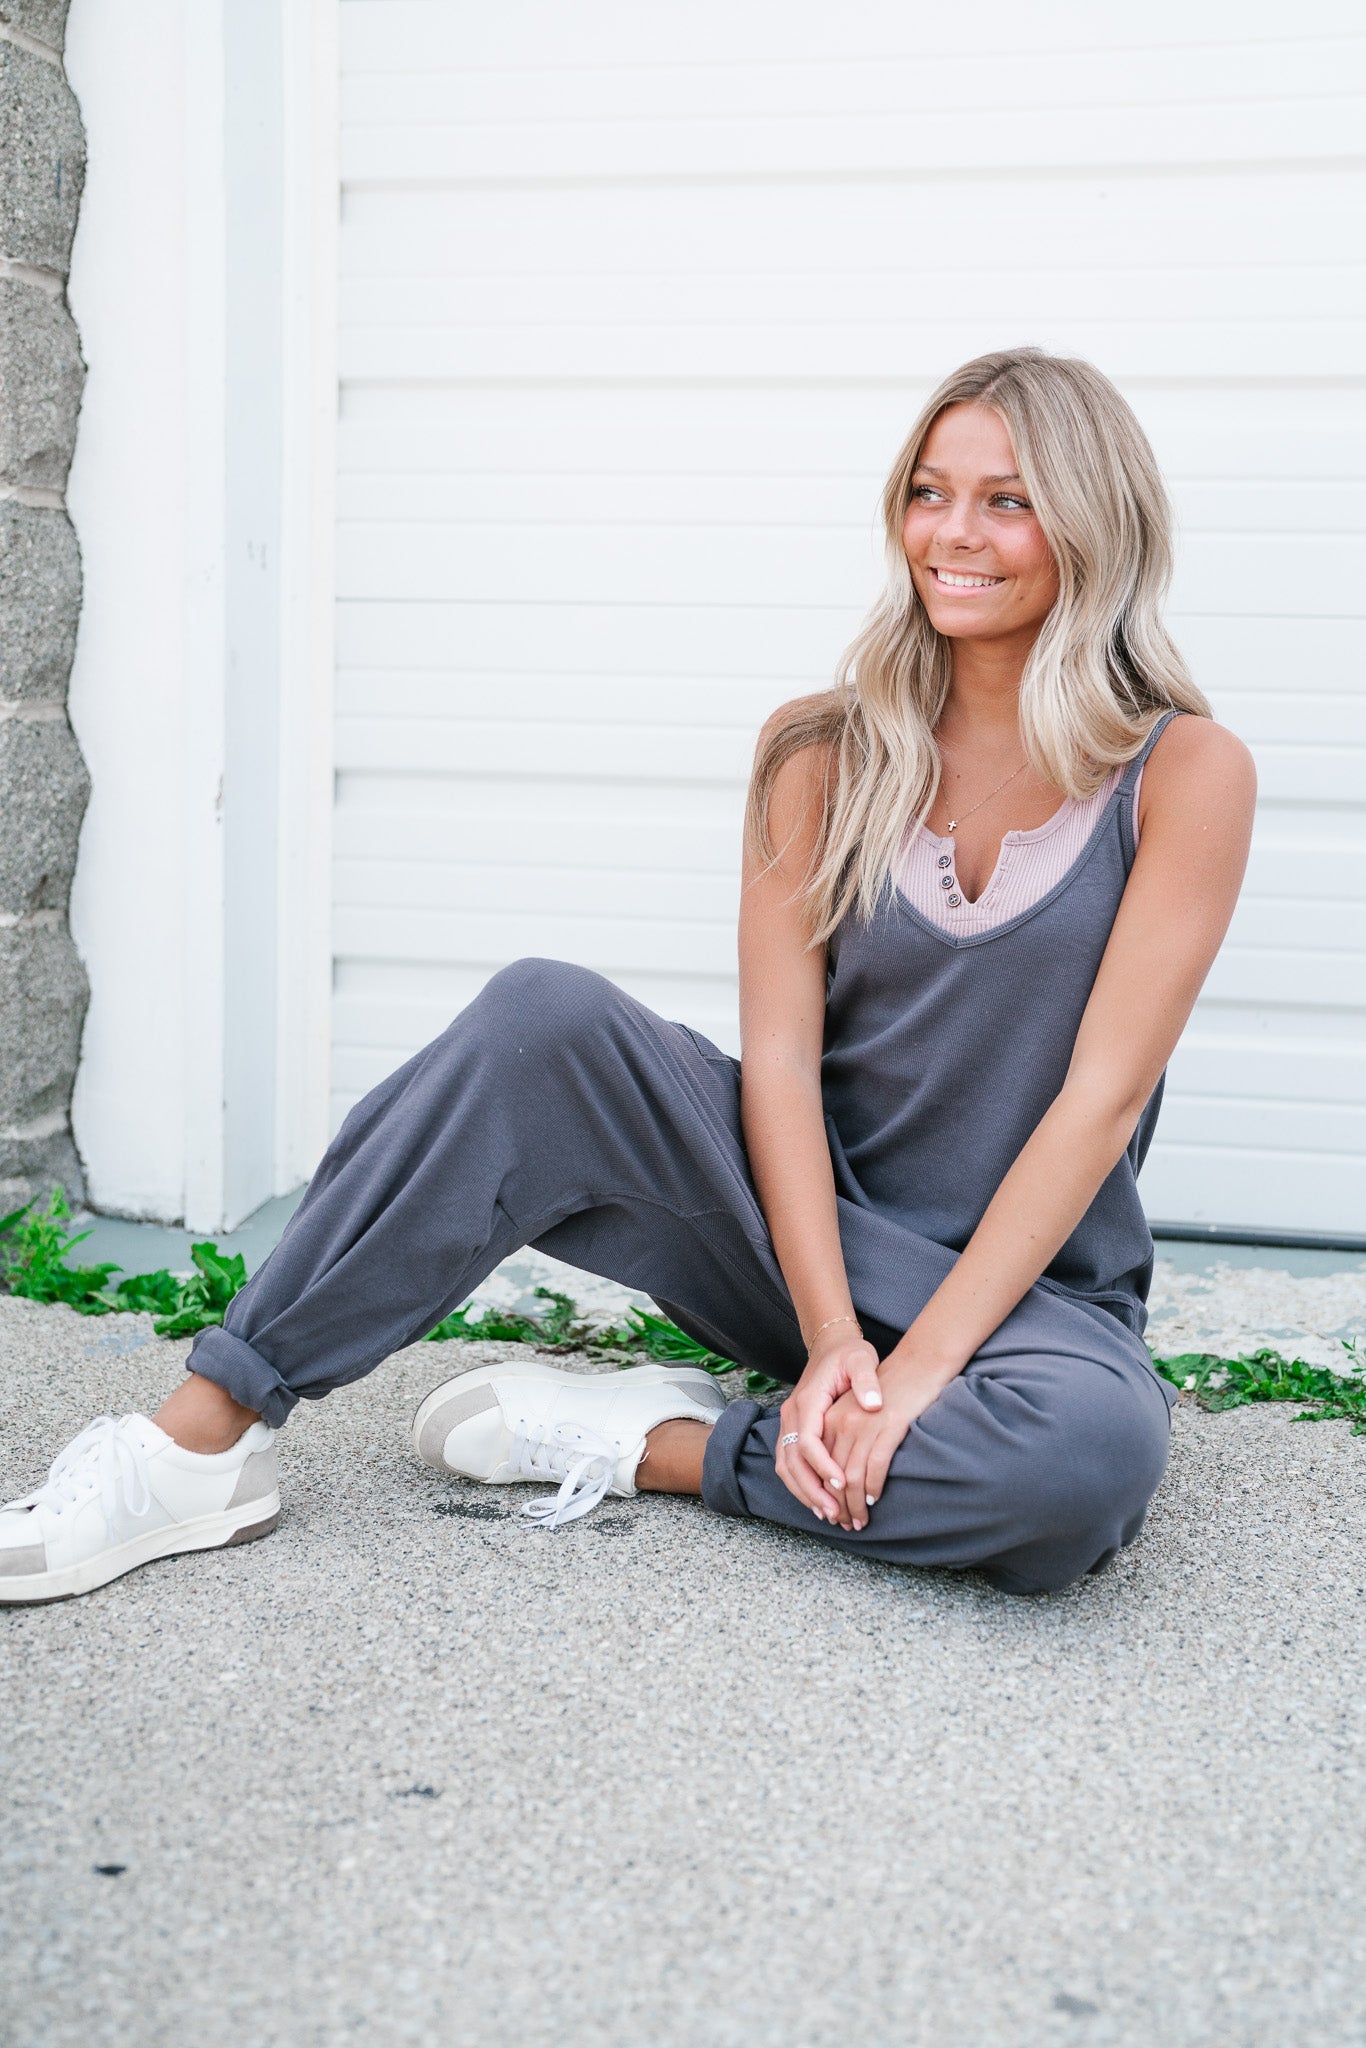 Flying Free Jumpsuit - Charcoal